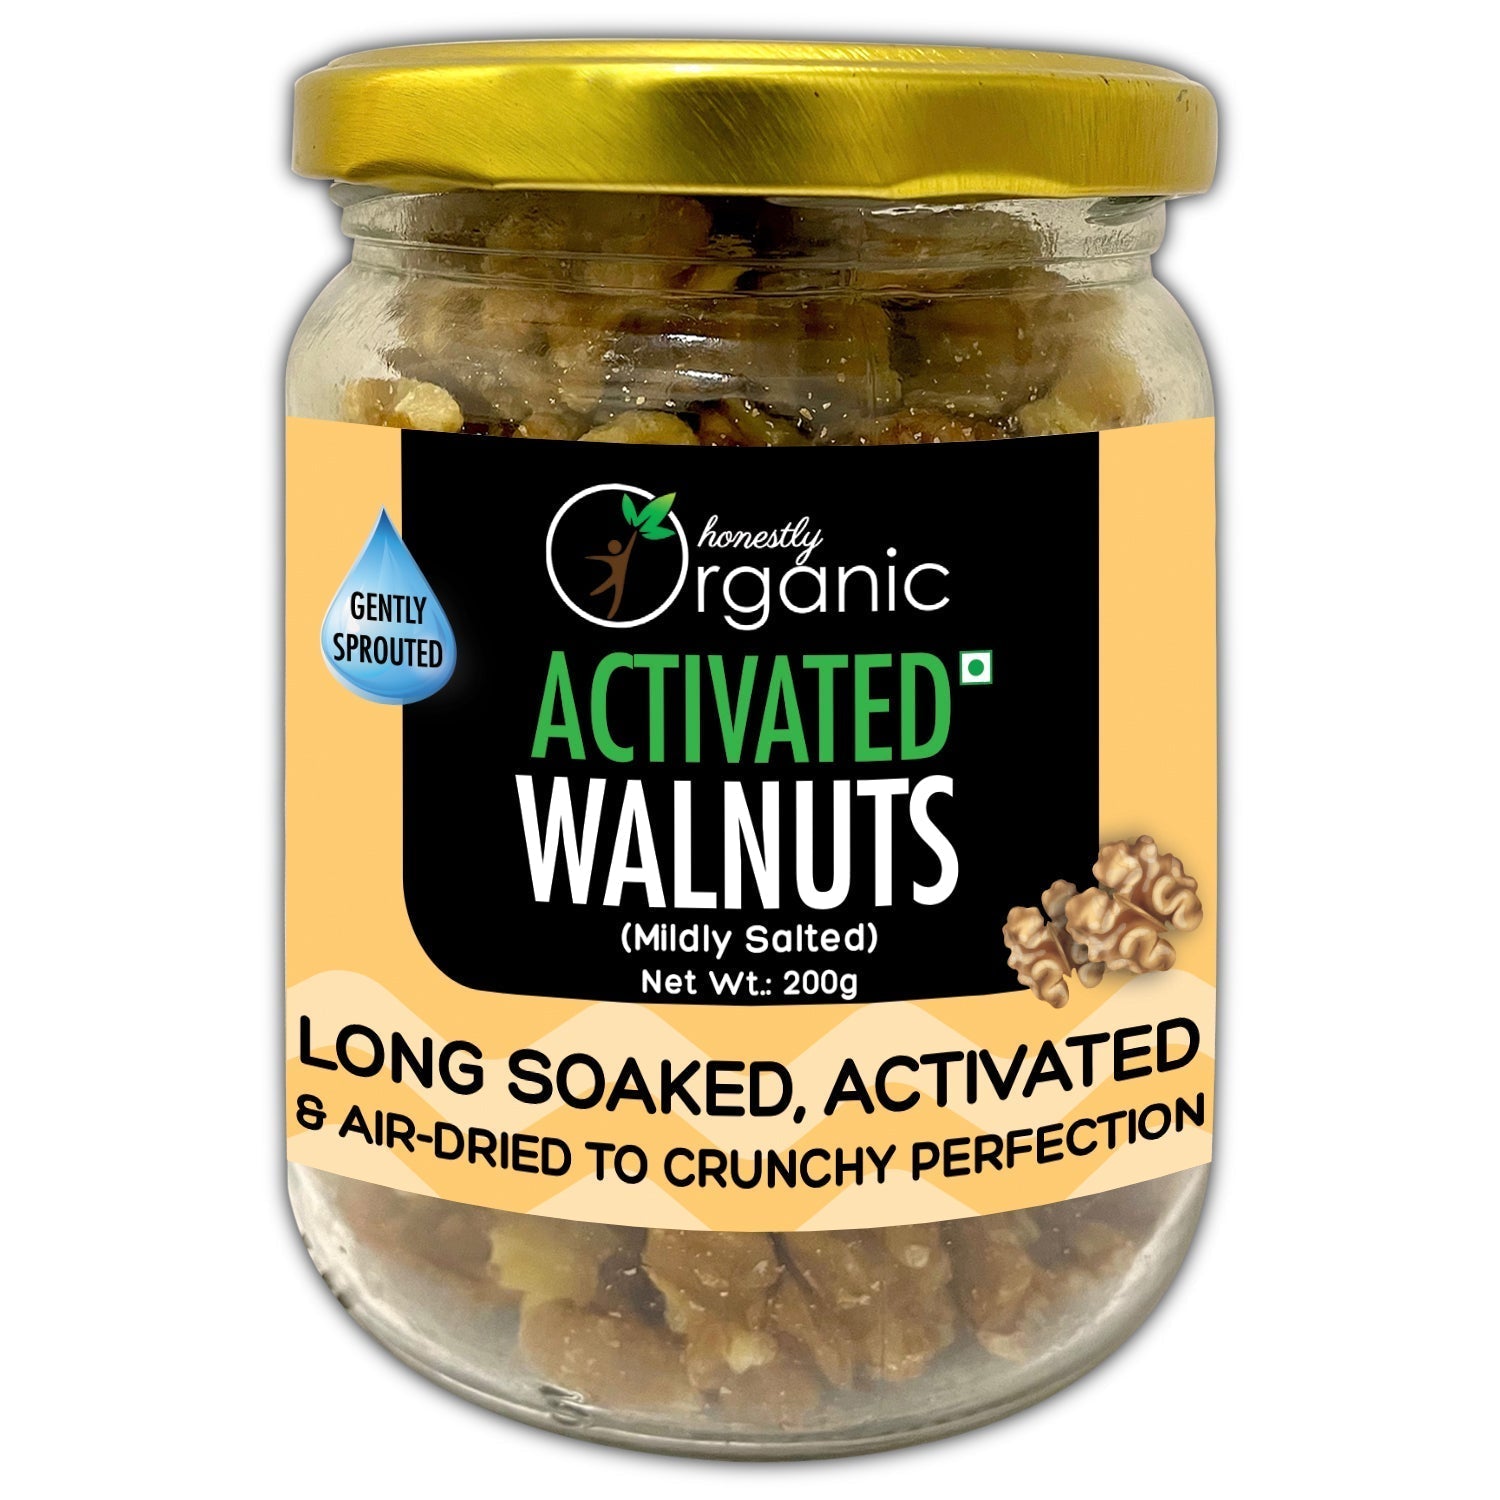 D-Alive Honestly Organic Activated Walnuts - buy in USA, Australia, Canada